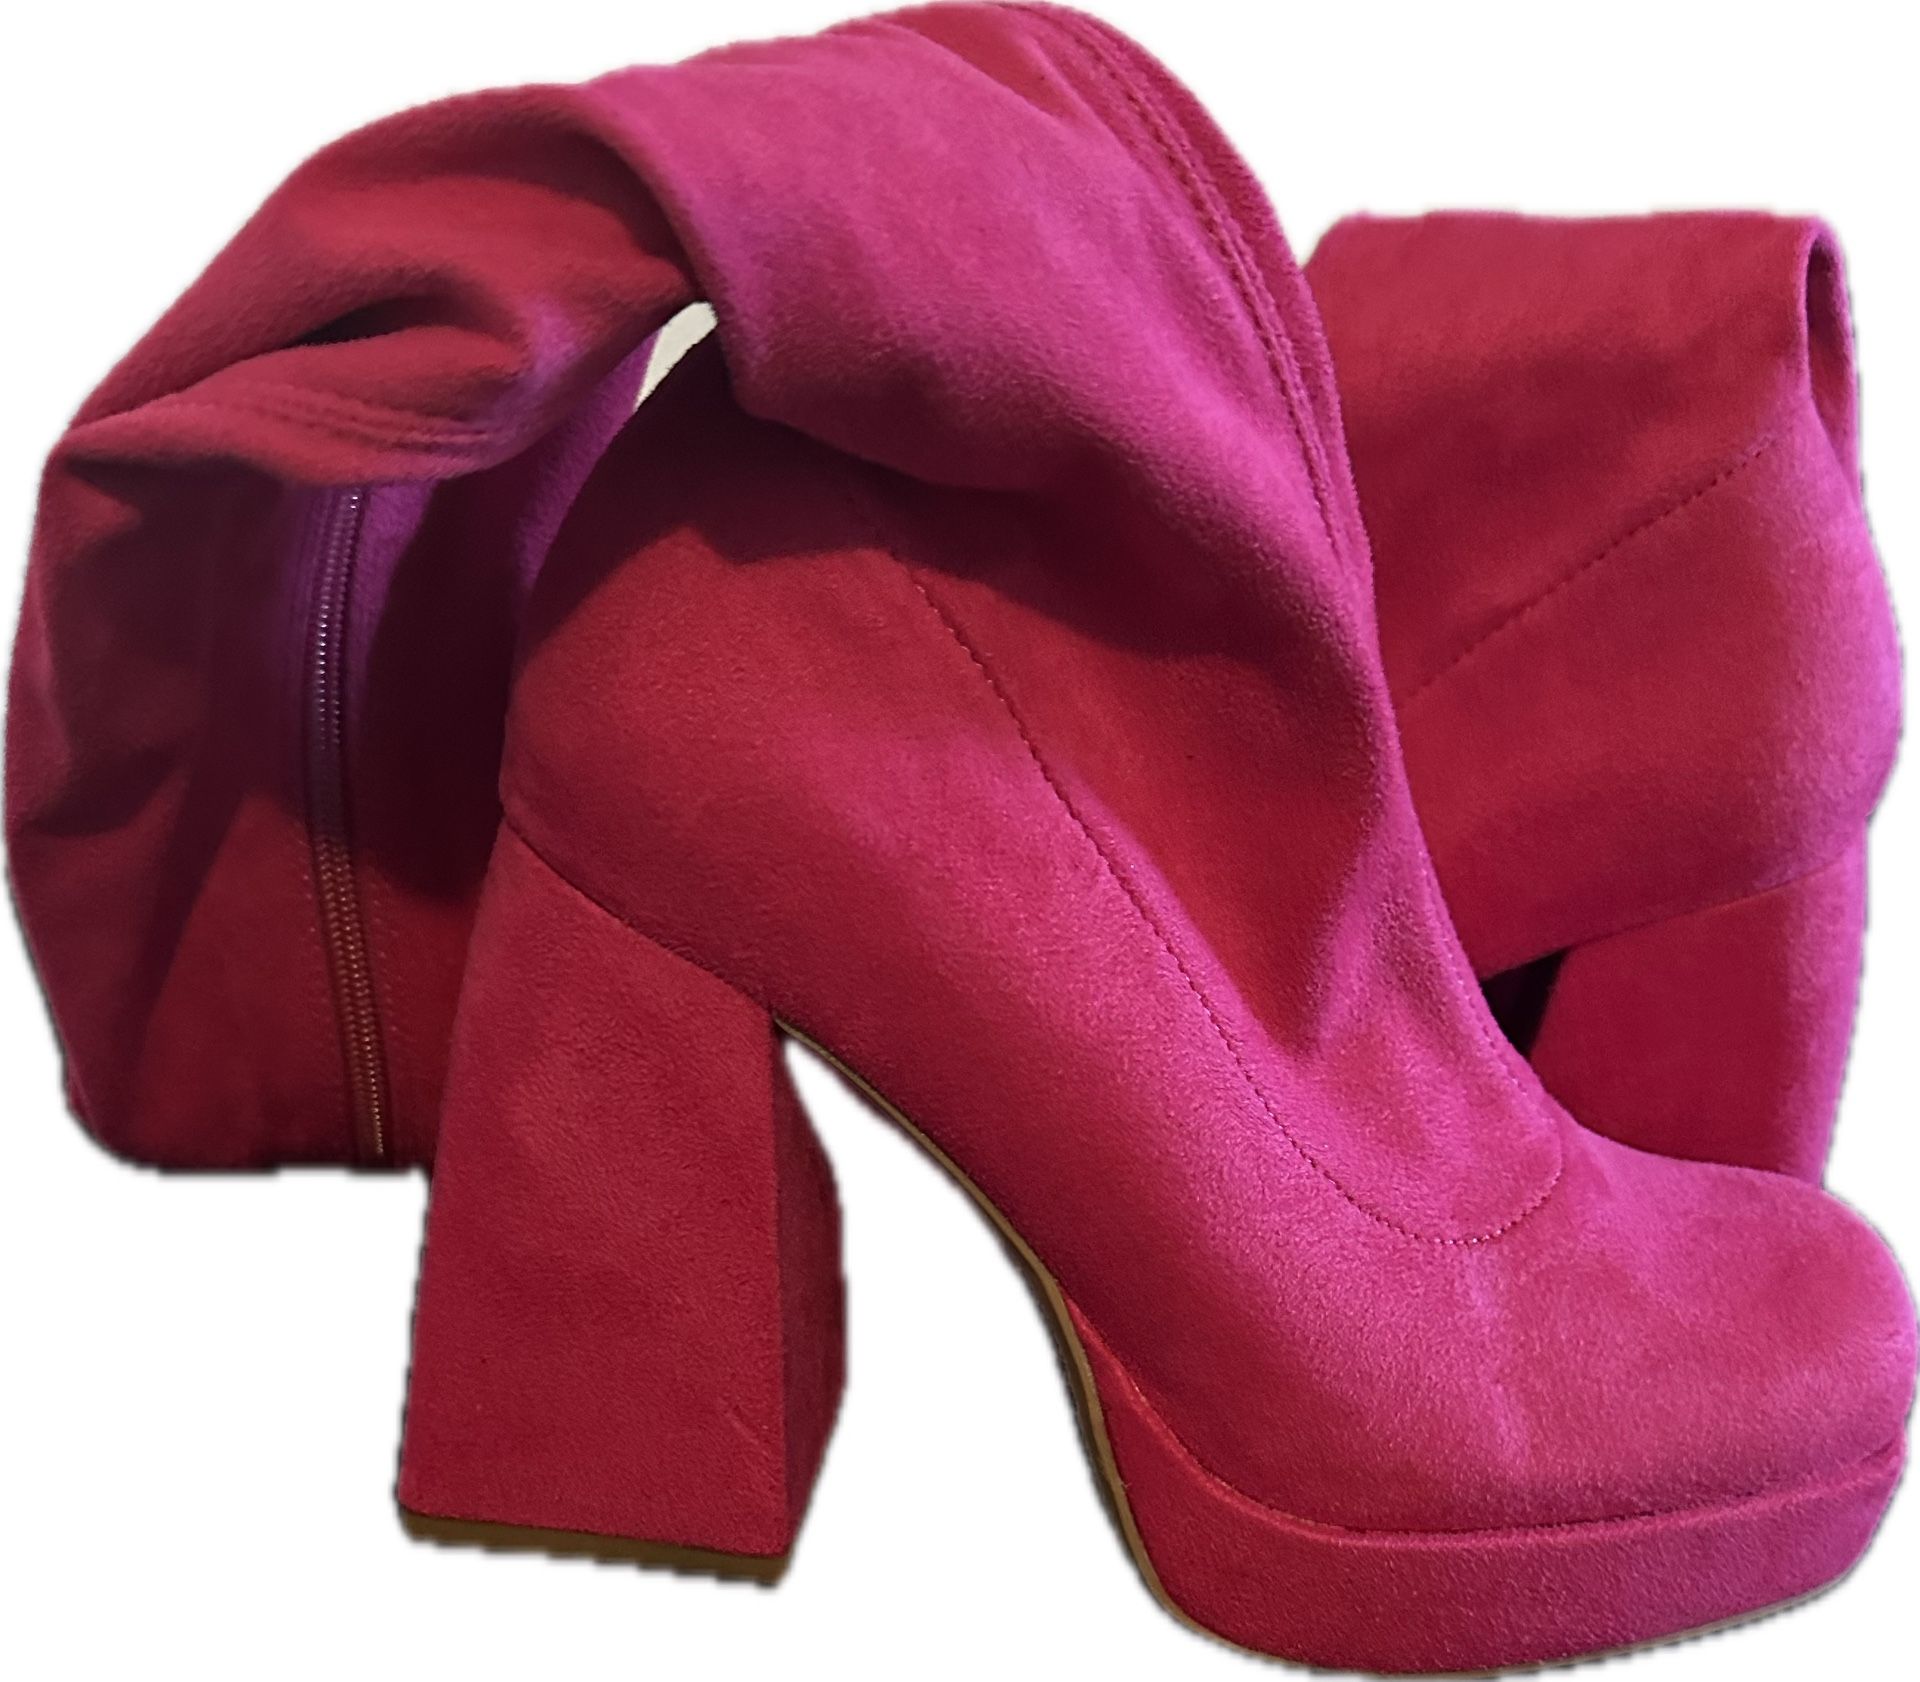 Pink Suede Boots